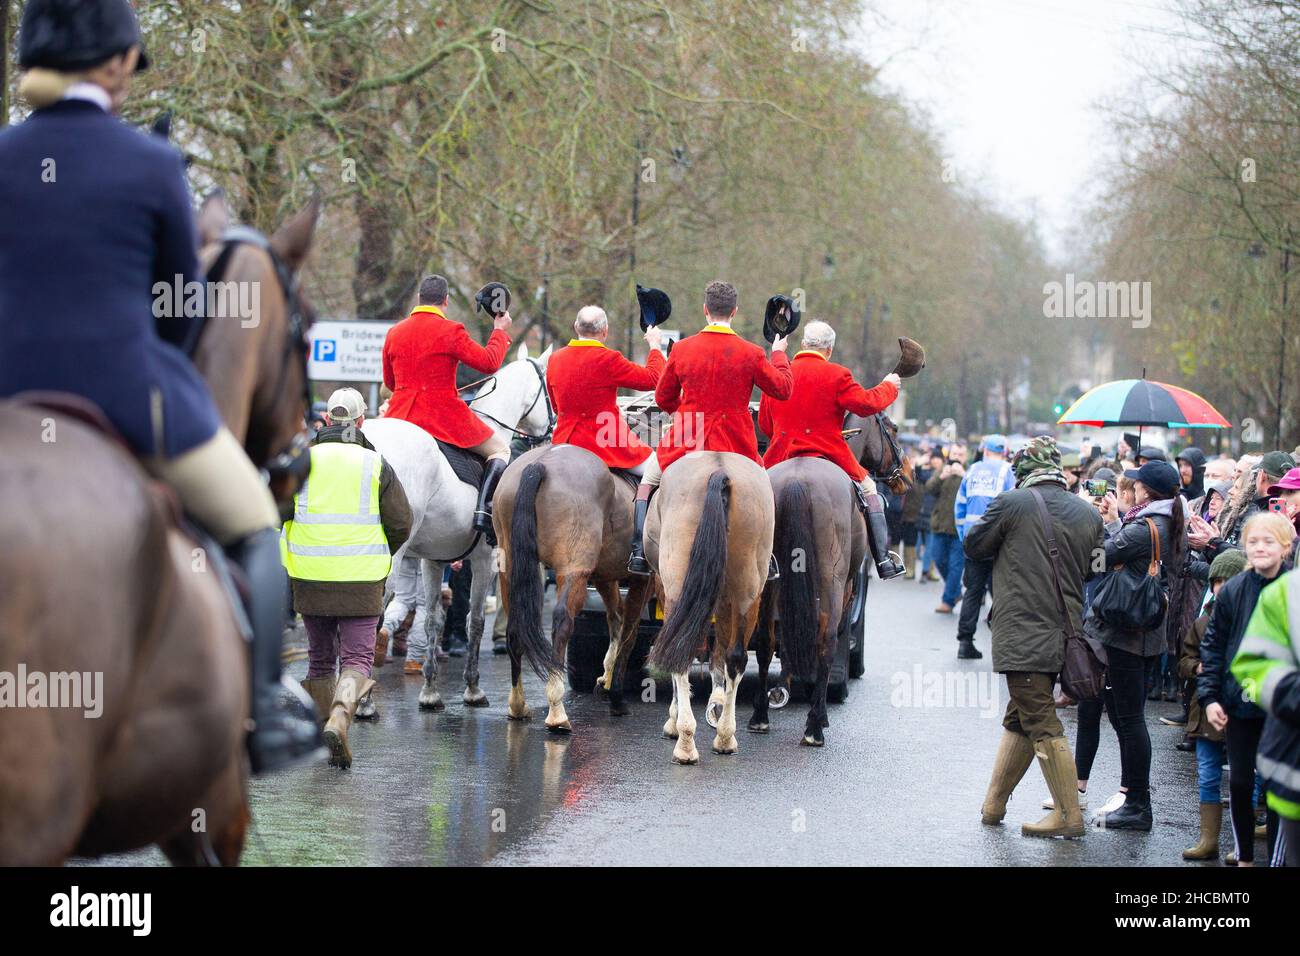 Tenterden, Kent, UK. 27 December, 2021. The annual Boxing Day meet of the  Ashford Valley Tickham Hunt goes ahead in the centre of Tenterden in Kent.  Hounds and horses pass by 'The